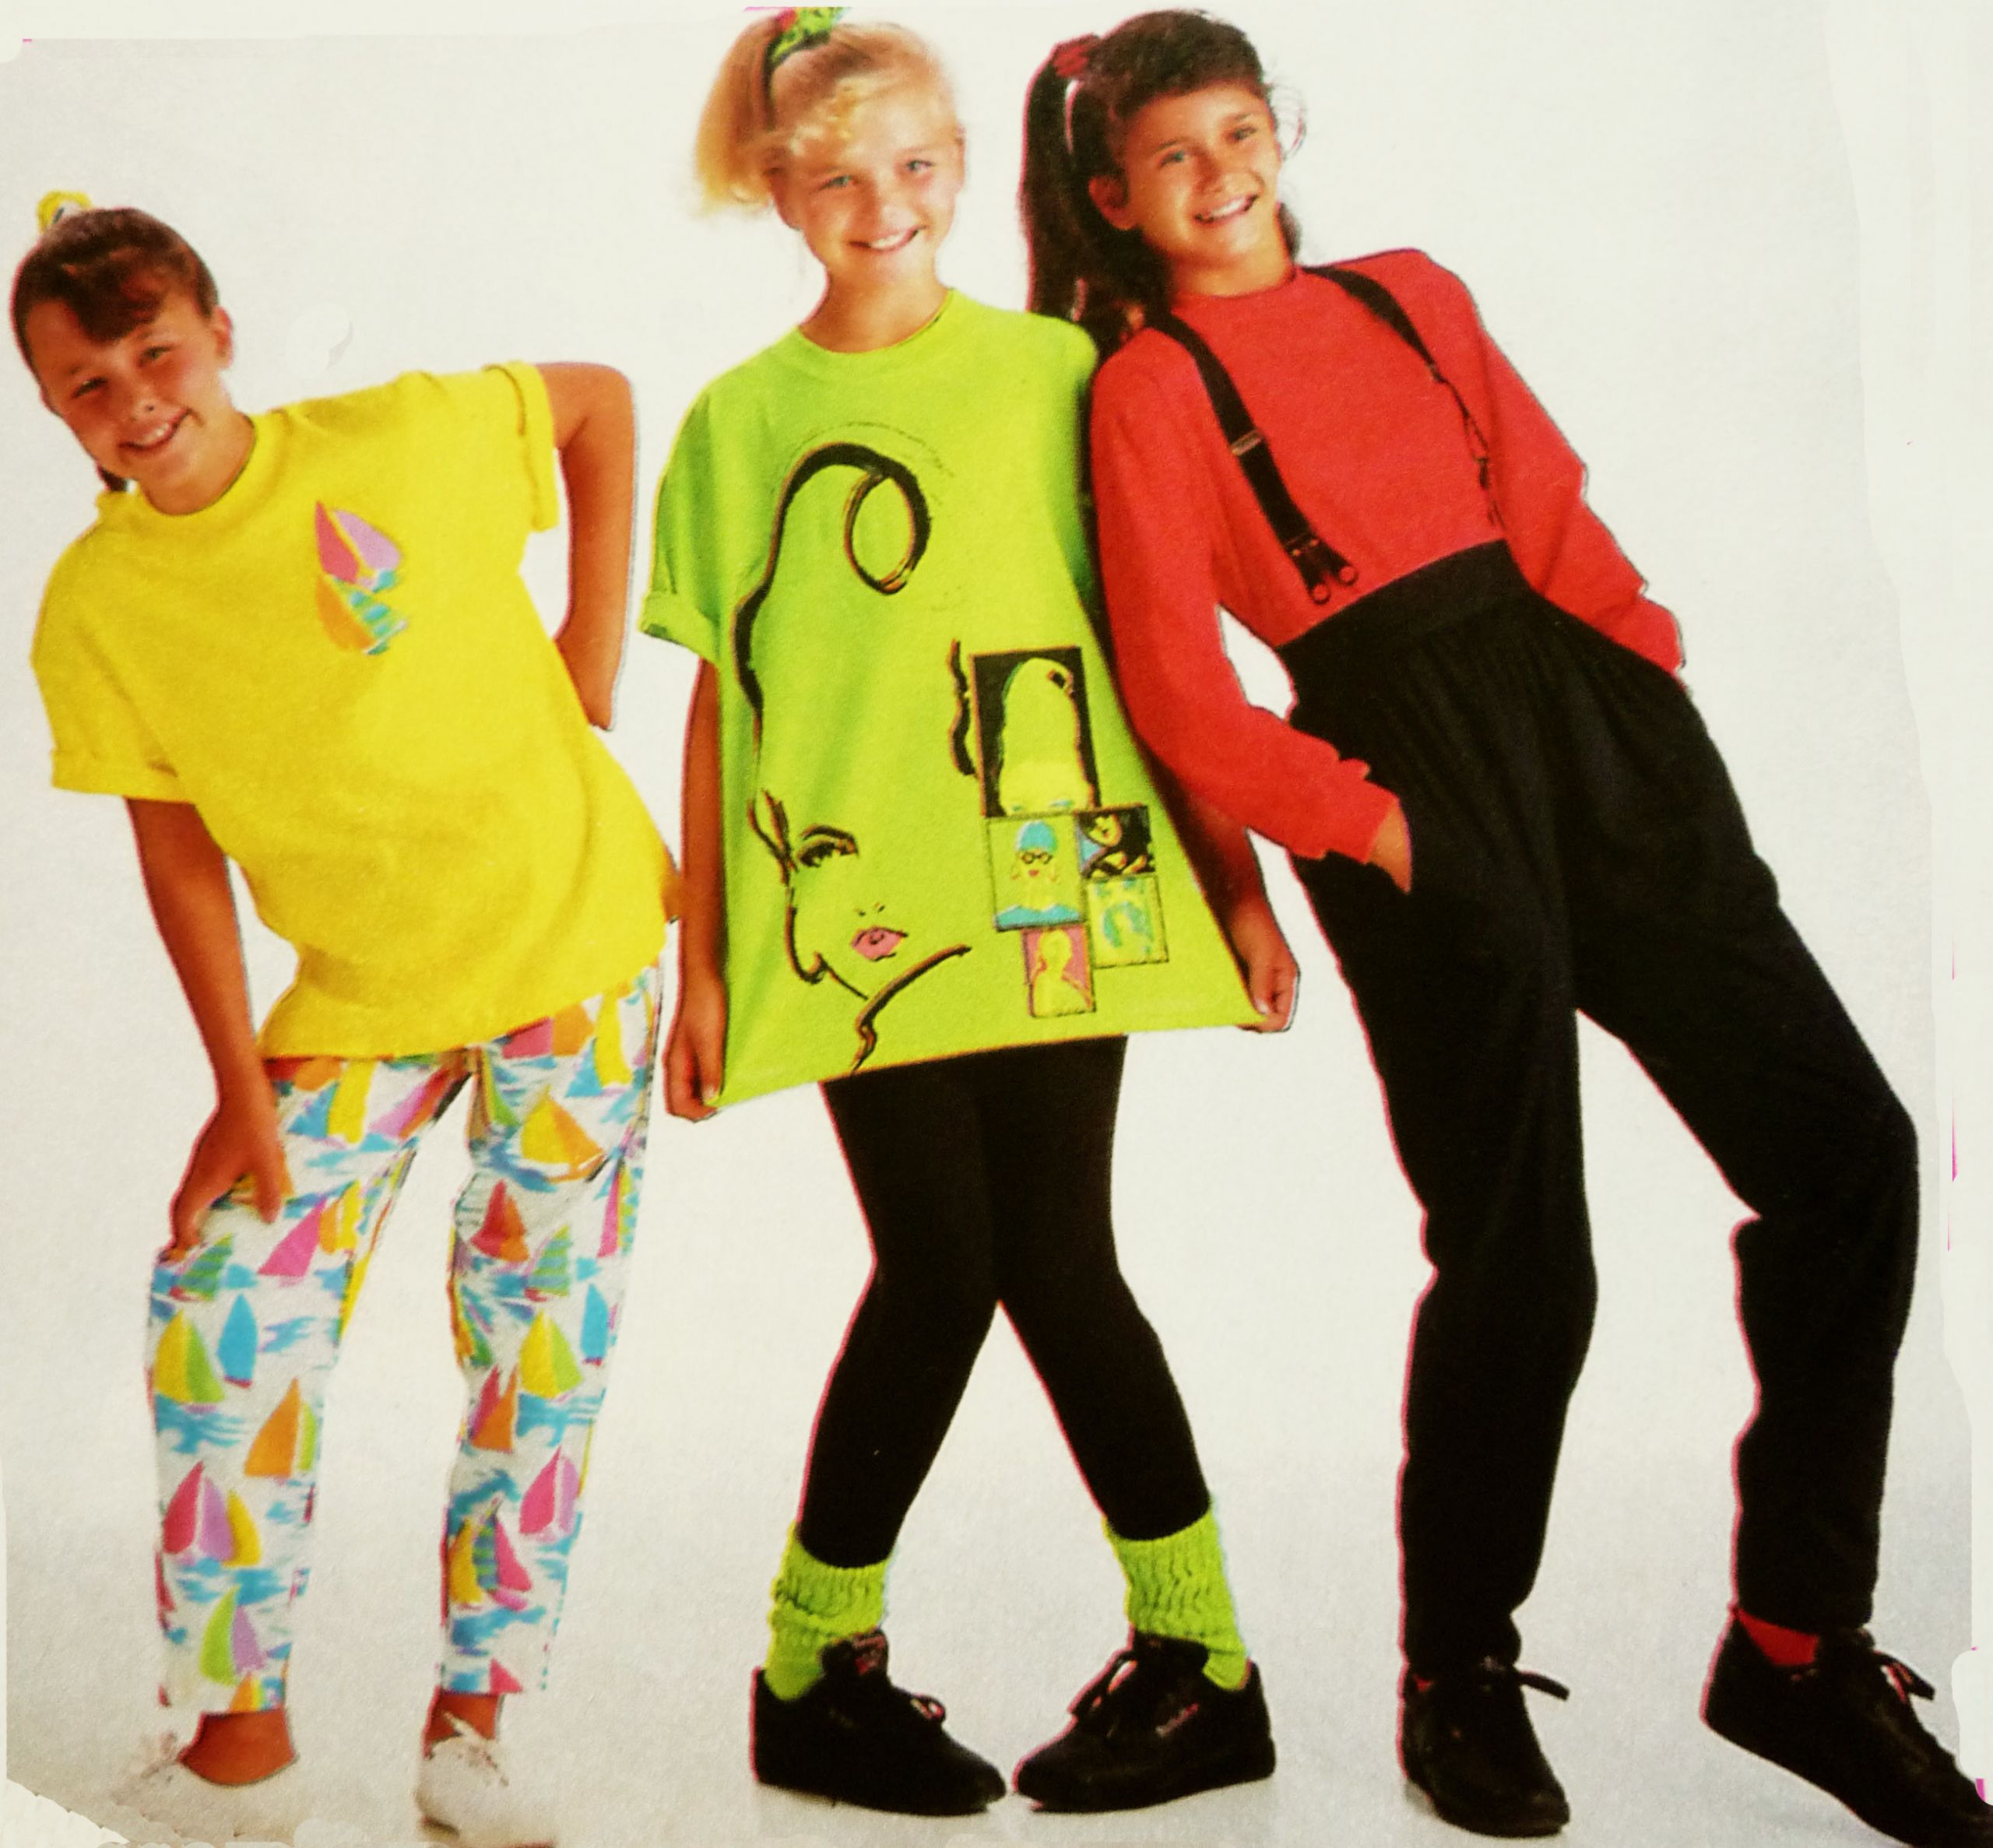 90s Fashion For Kids Beautiful 80 S Outfits To Wear To Theme Parties Halloween Night Of 90s Fashion For Kids Scaled 